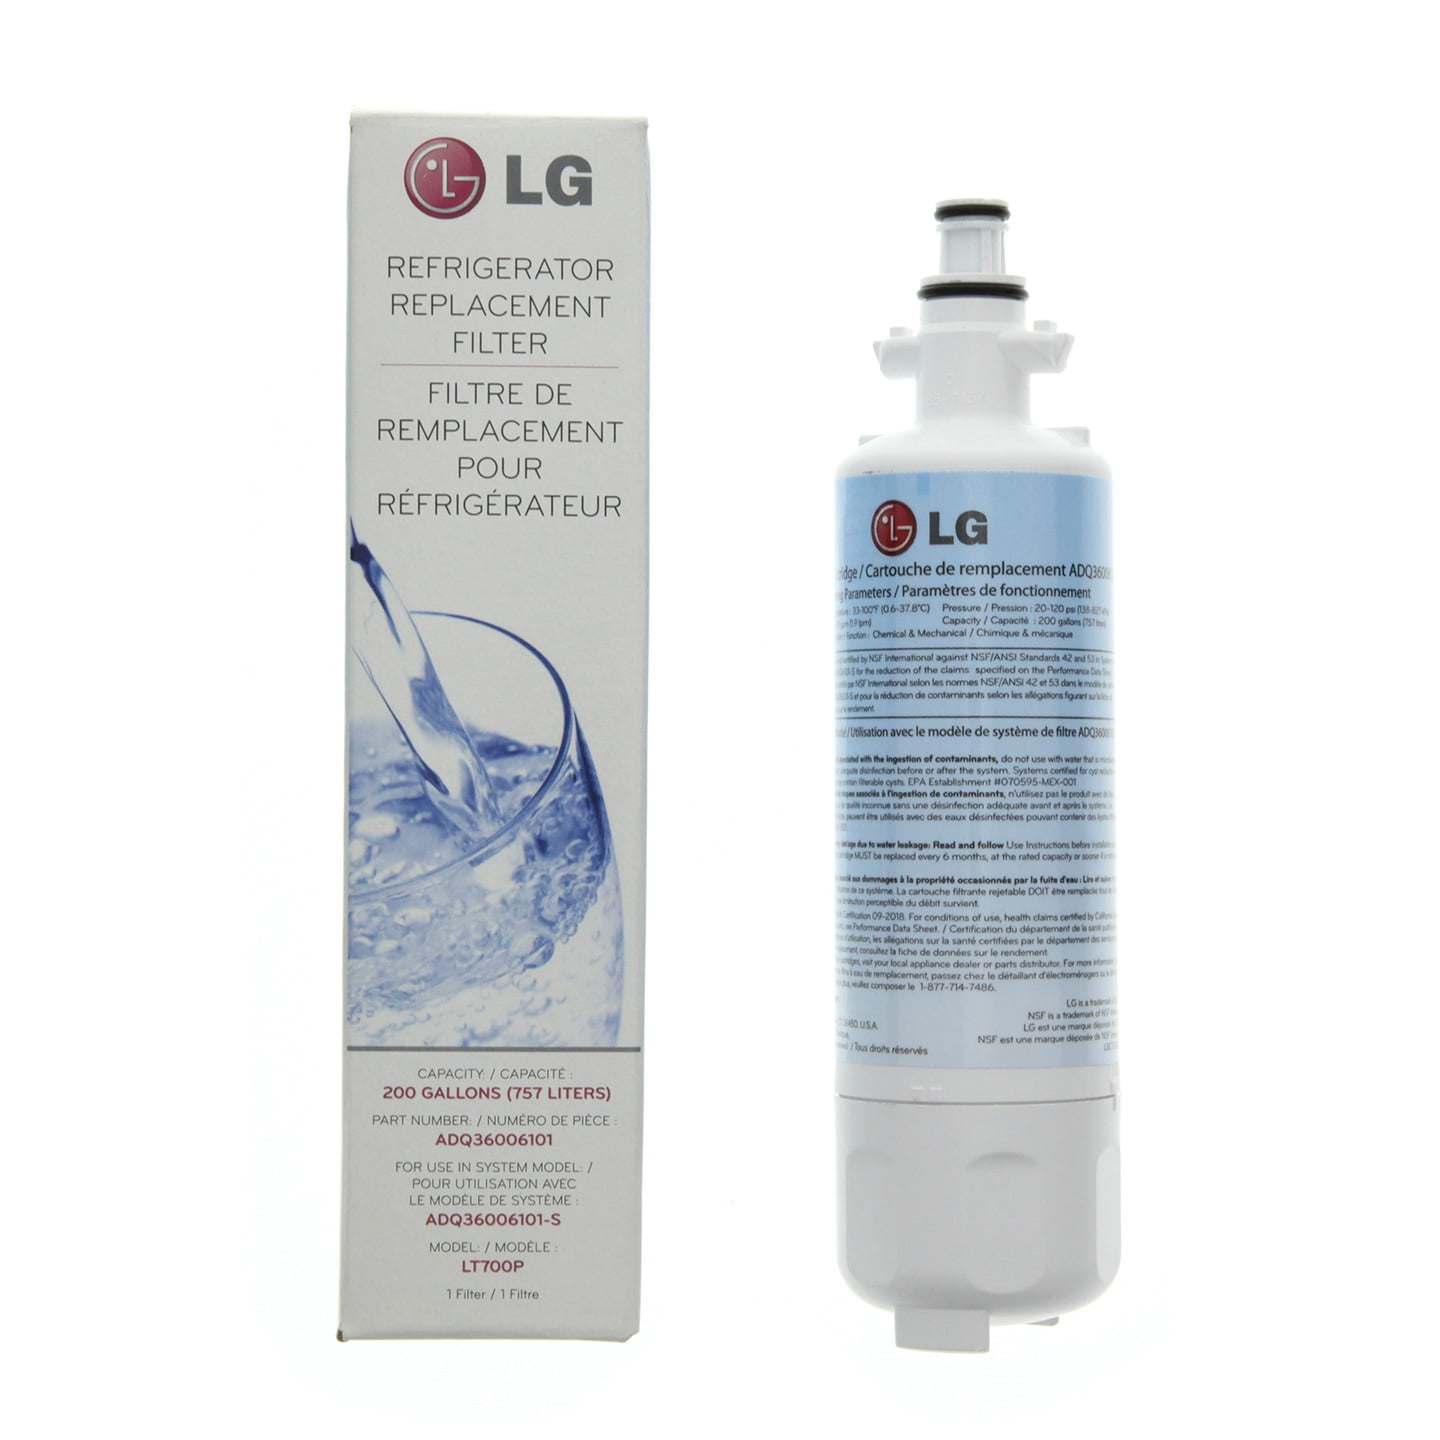 US 3*Replacement LG LT700P ADQ36006101 469690 Refrigerator Water Filter Sealed 